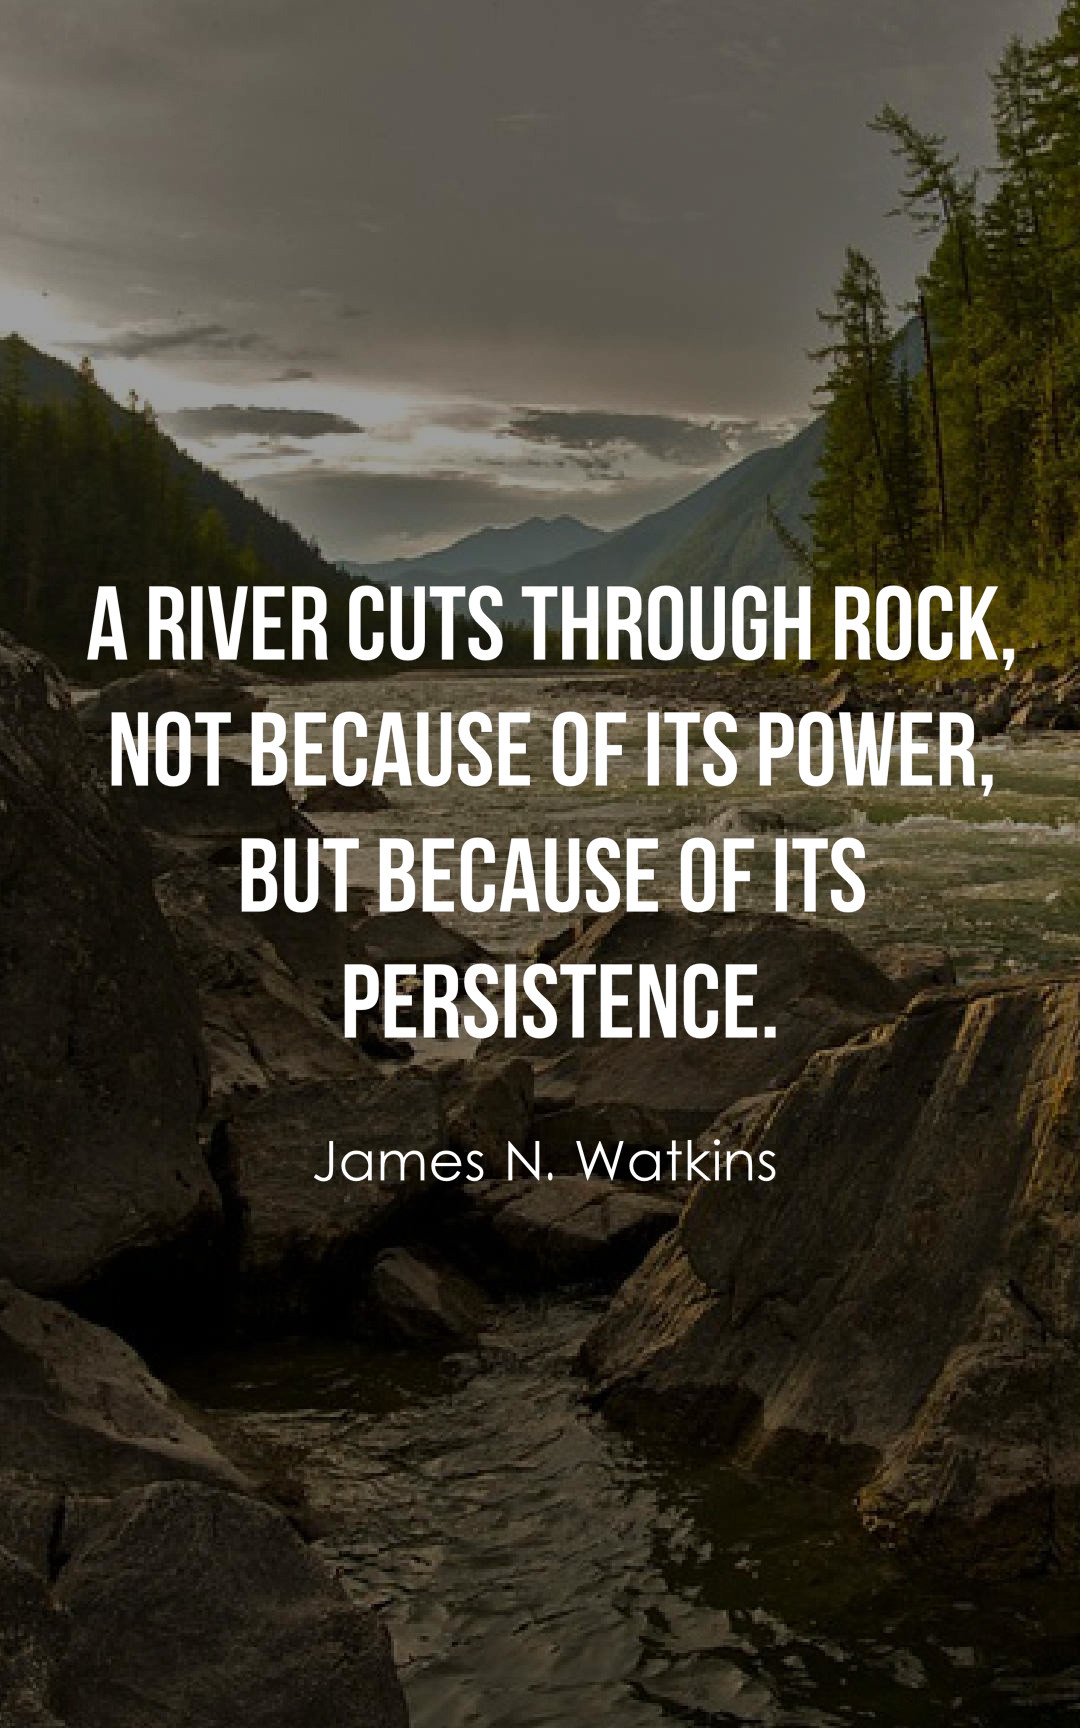 Images Of Inspirational Quotes
 20 Inspirational River Quotes And Sayings